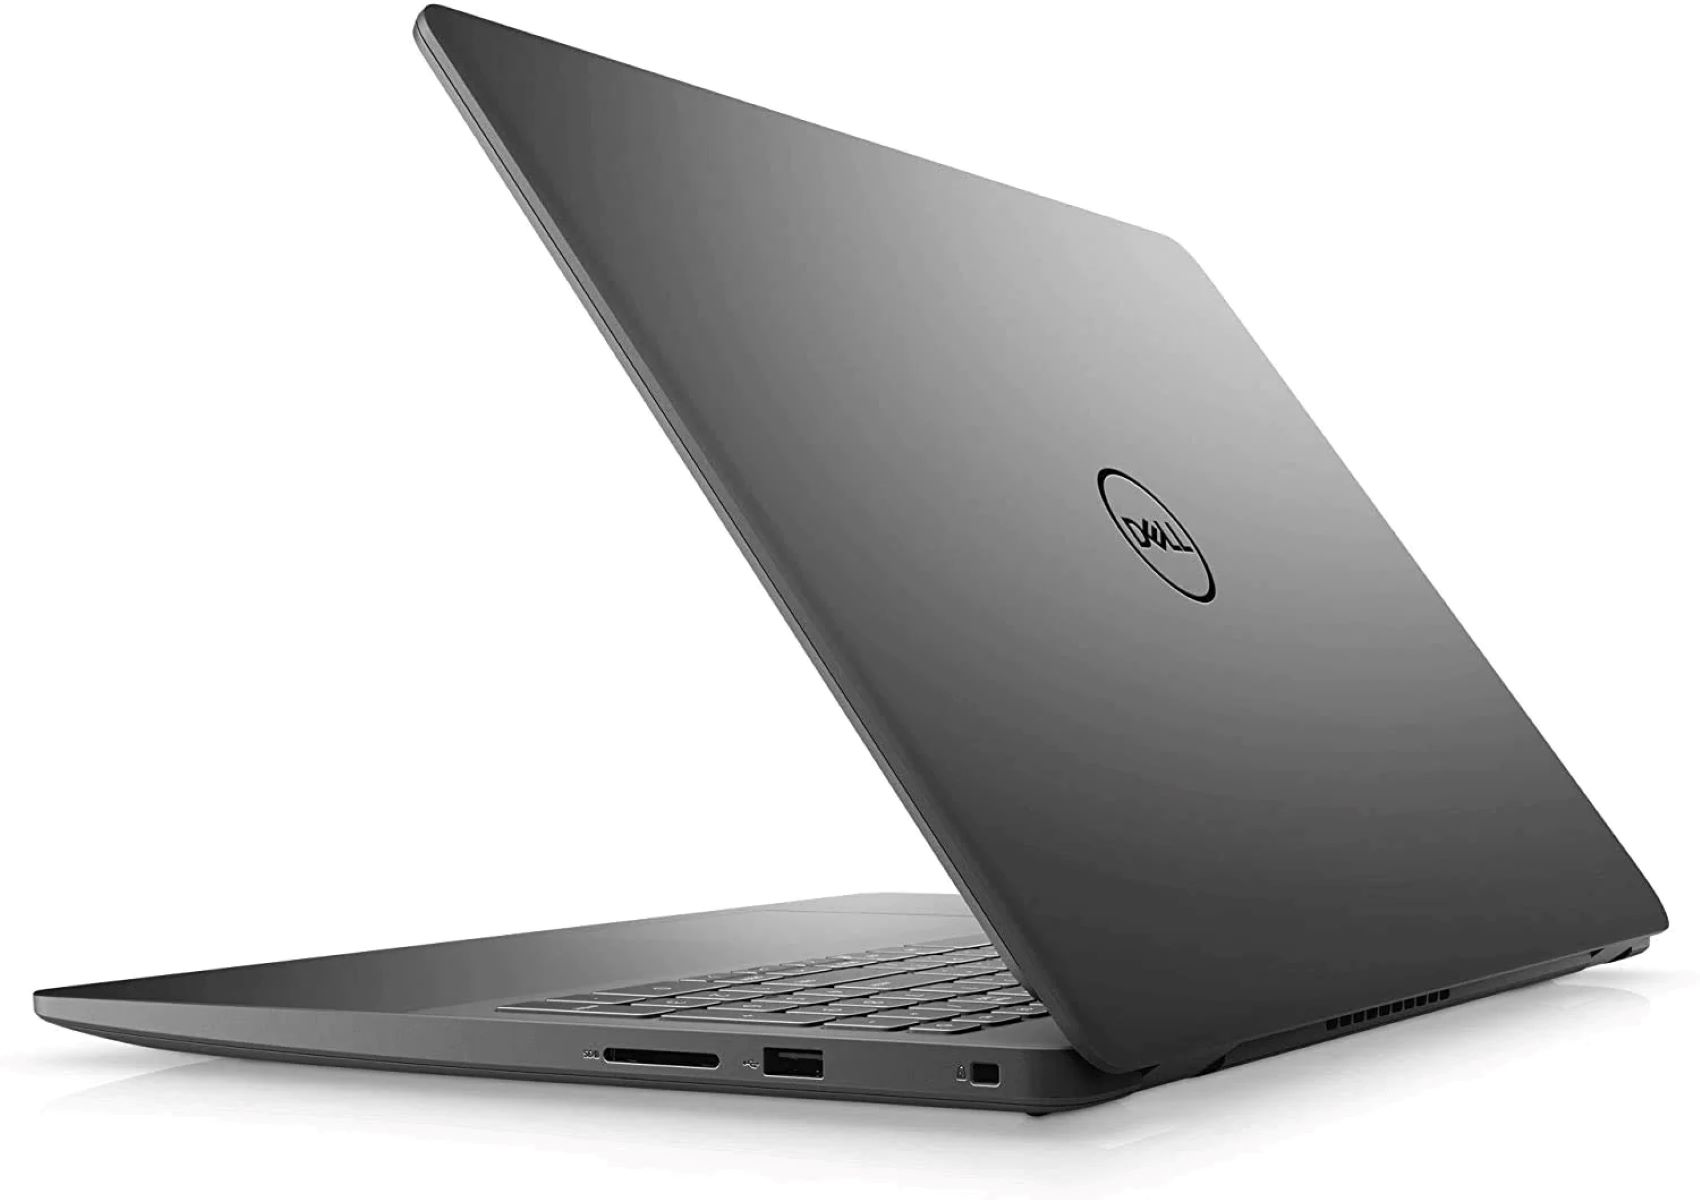 How To Turn On Wireless Capability On Dell Laptop